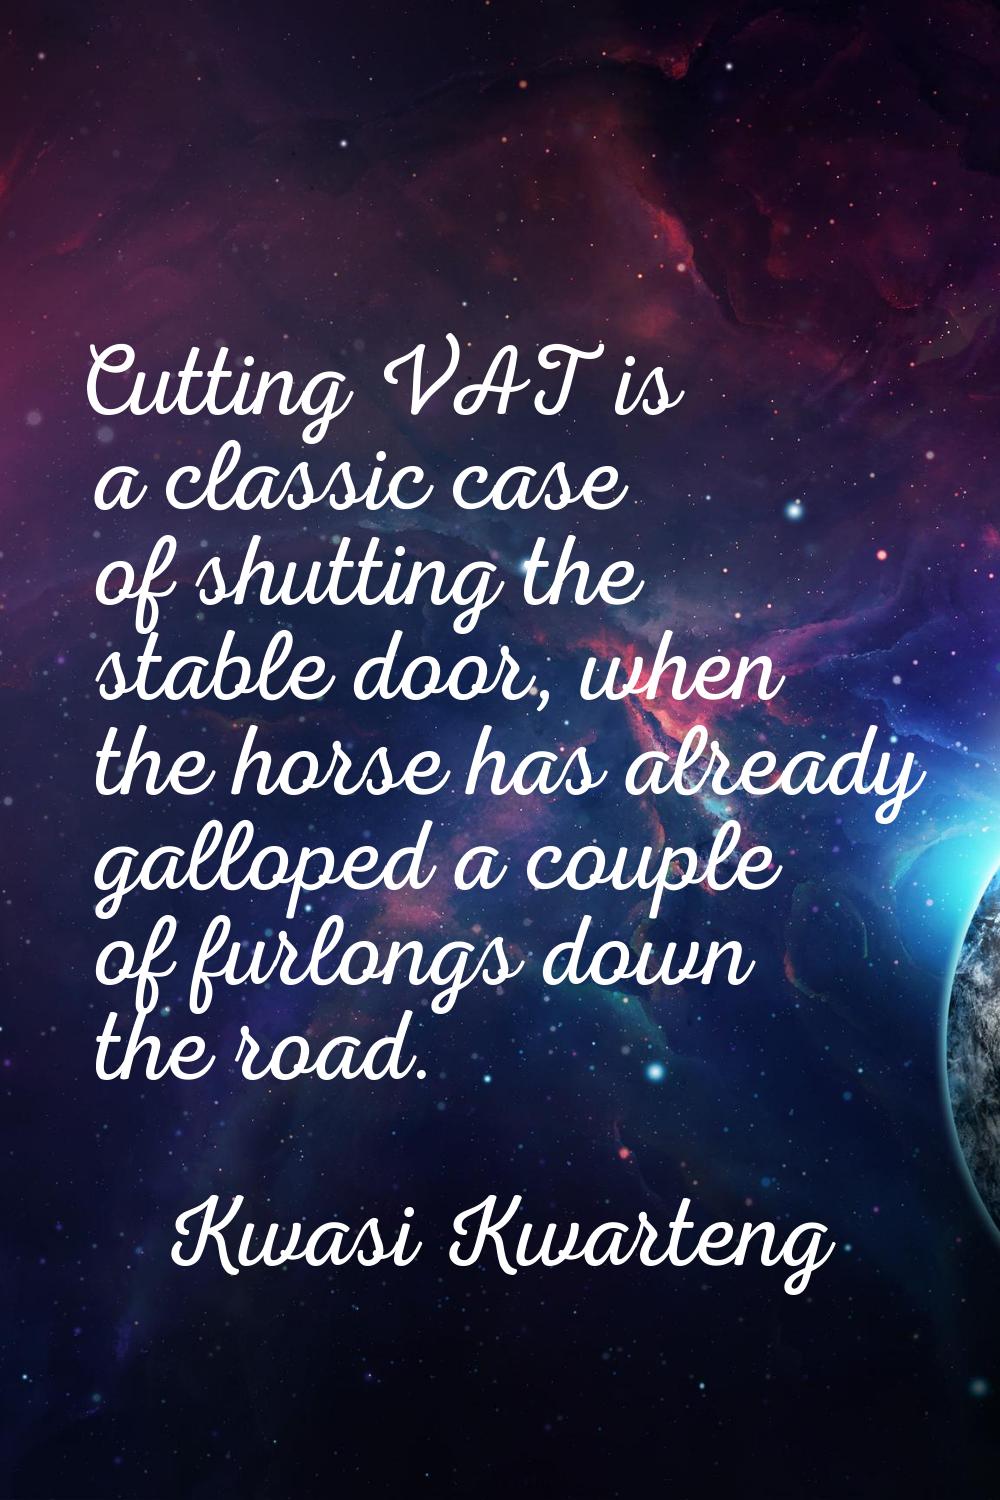 Cutting VAT is a classic case of shutting the stable door, when the horse has already galloped a co